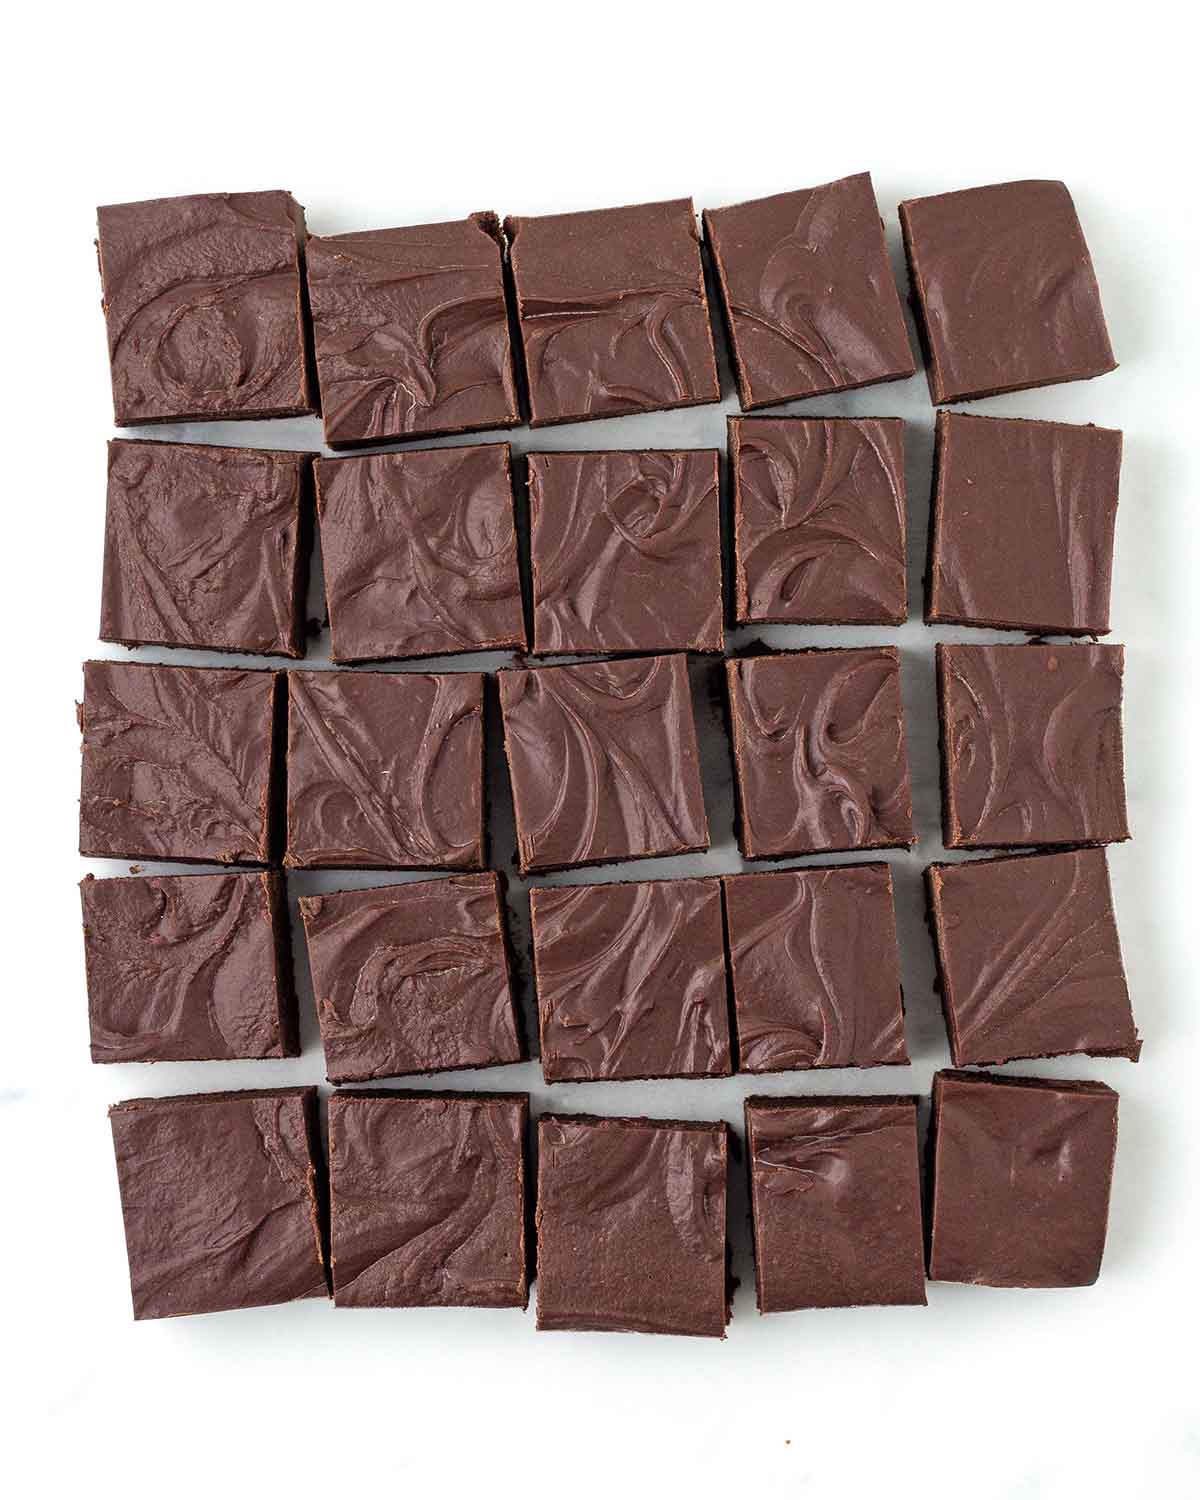 An overhead image of sliced squares of dairy-free fudge.